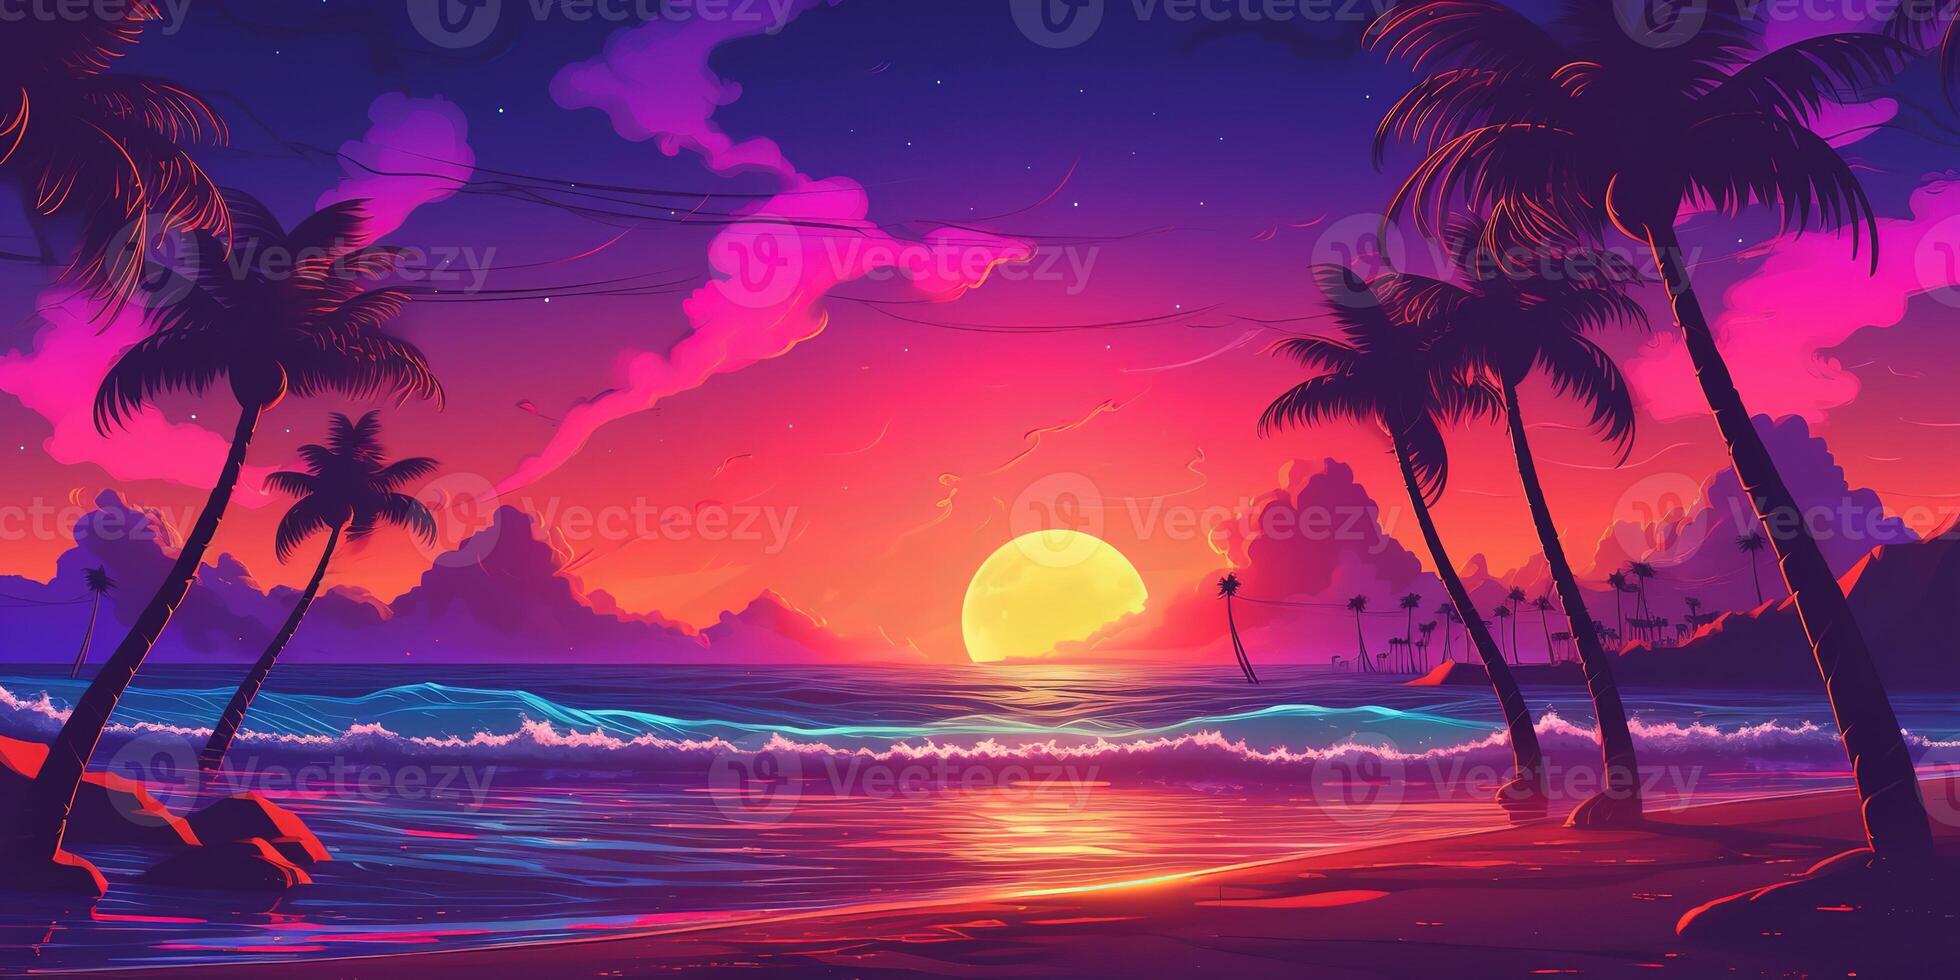 Aesthetic beach synthwave retrowave wallpaper with a cool and vibrant ...